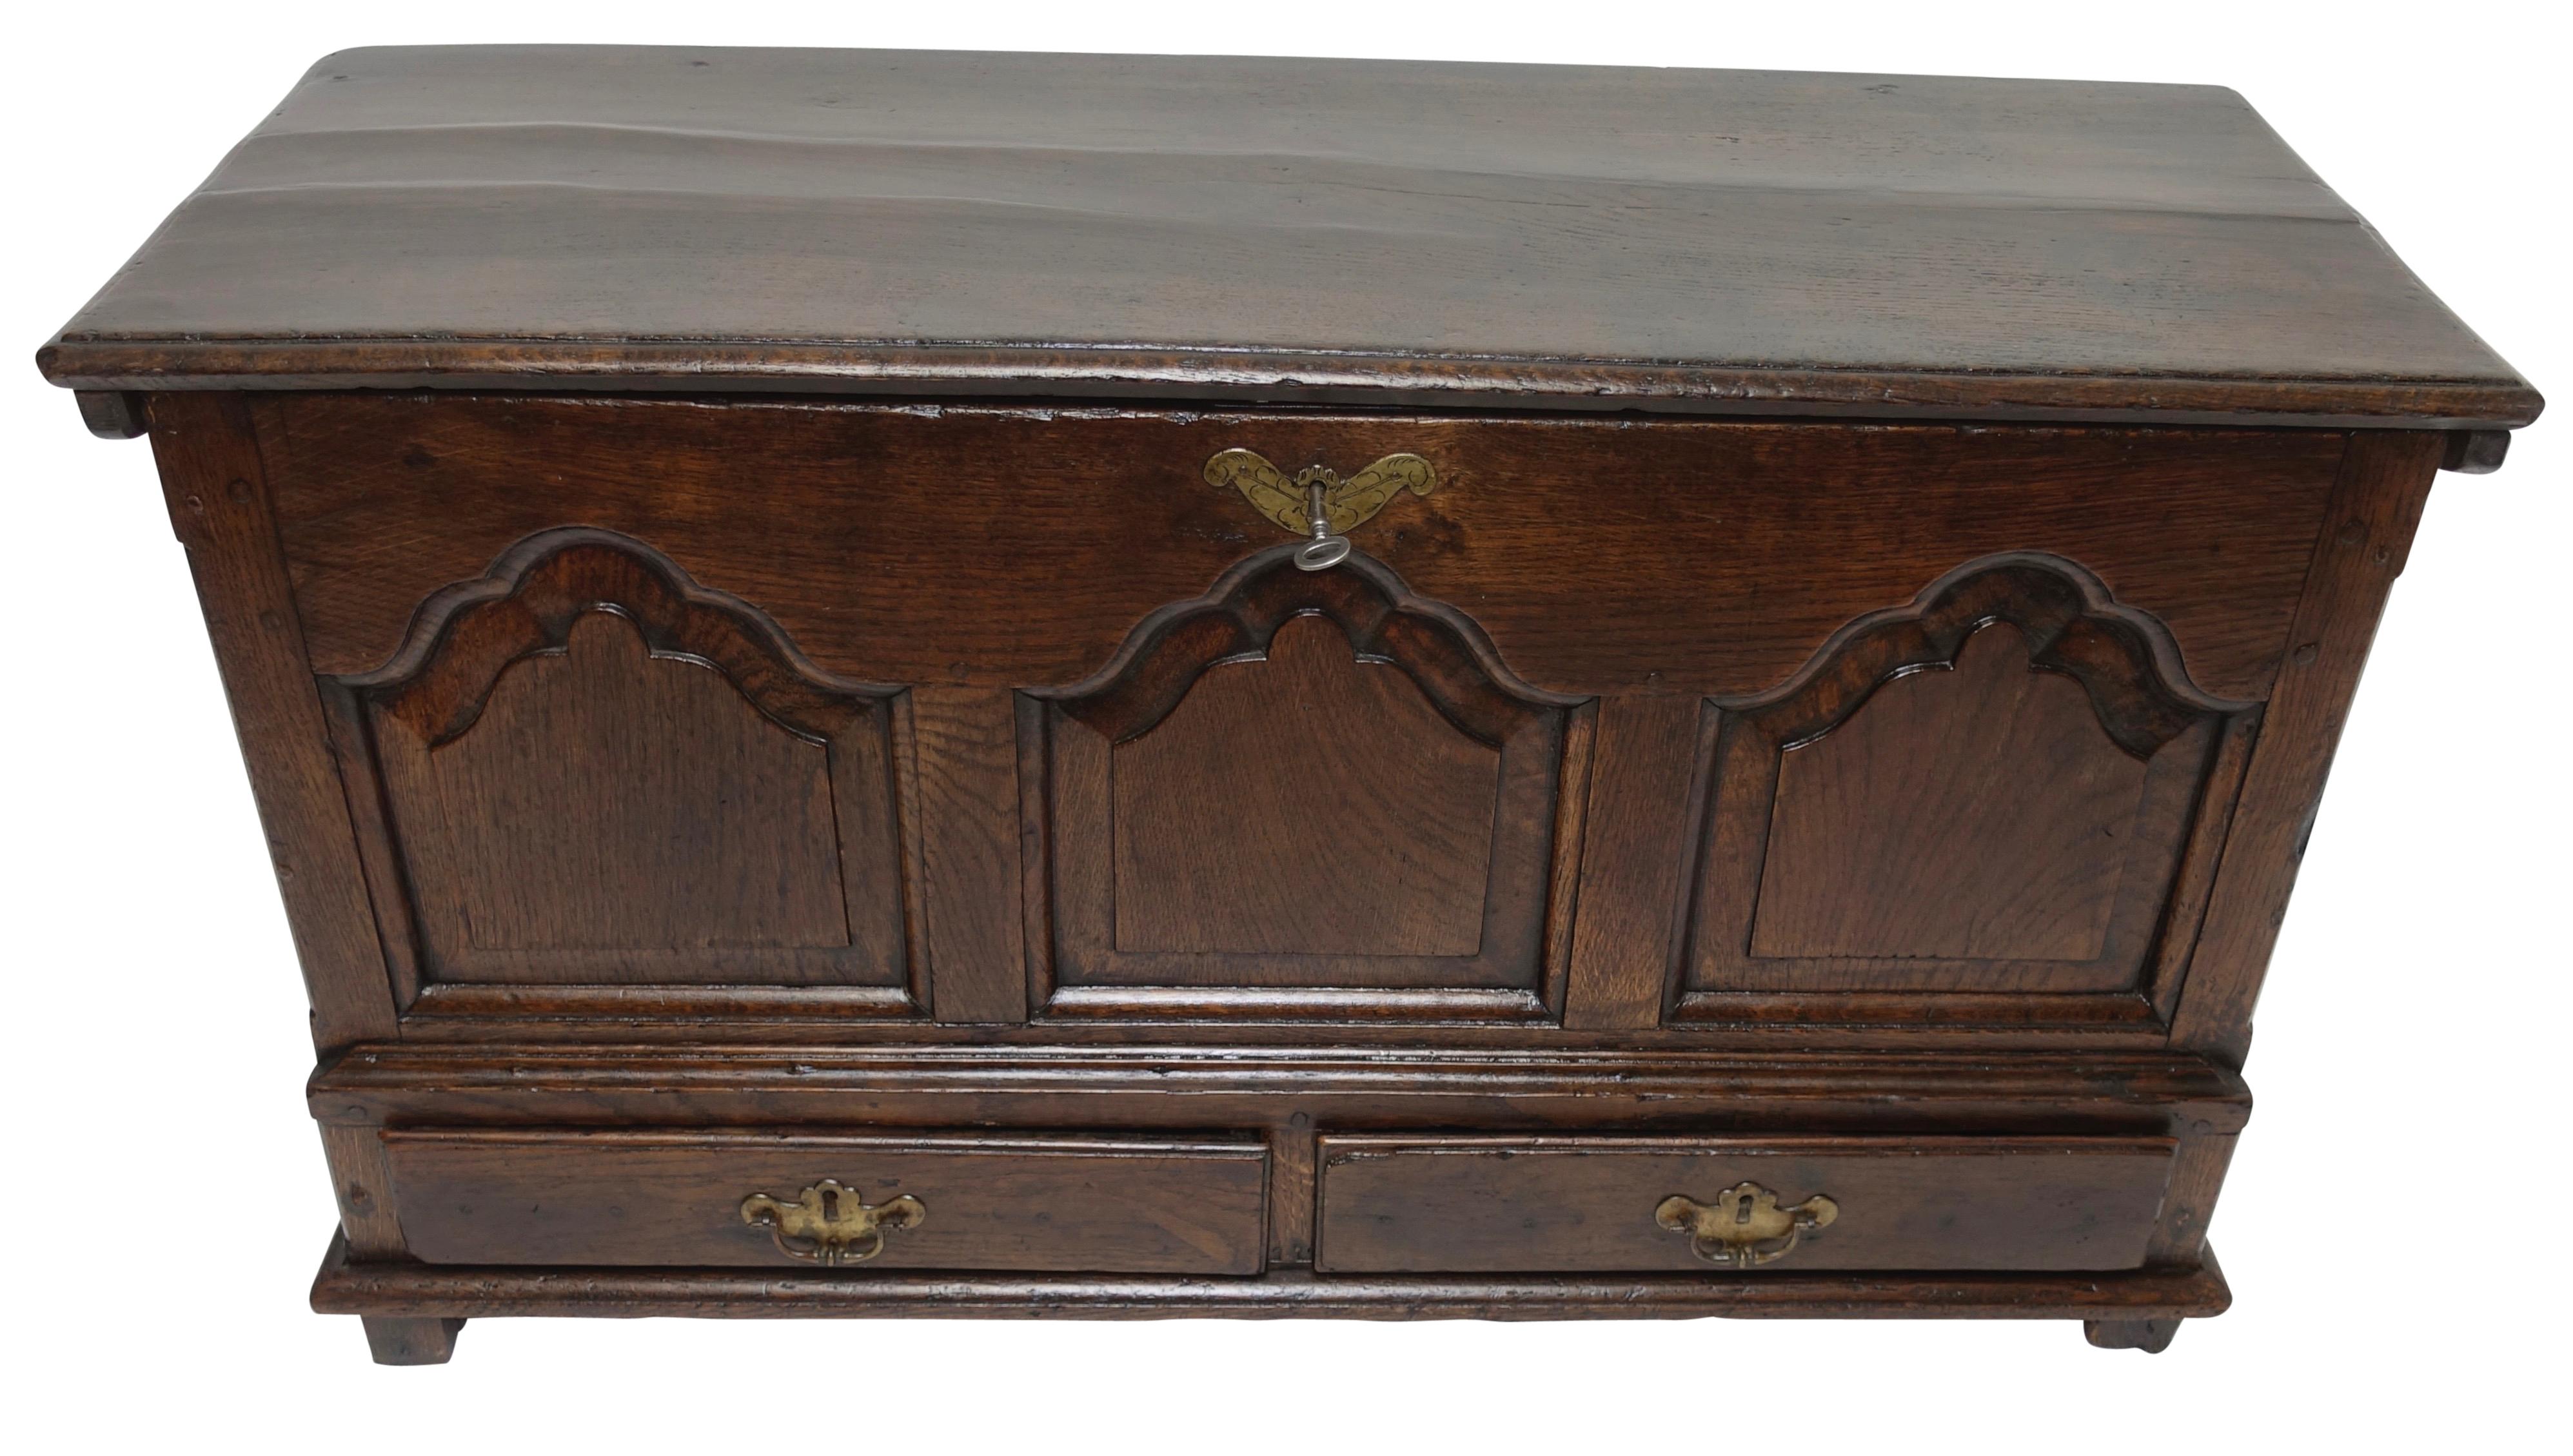 Unusual small-scale oak coffer. Having its original color and finish, mostly original hardware (hinges and lock have been re-placed. England, early 18th century.
Excellent and easily useable for a table, blanket chest or bench.